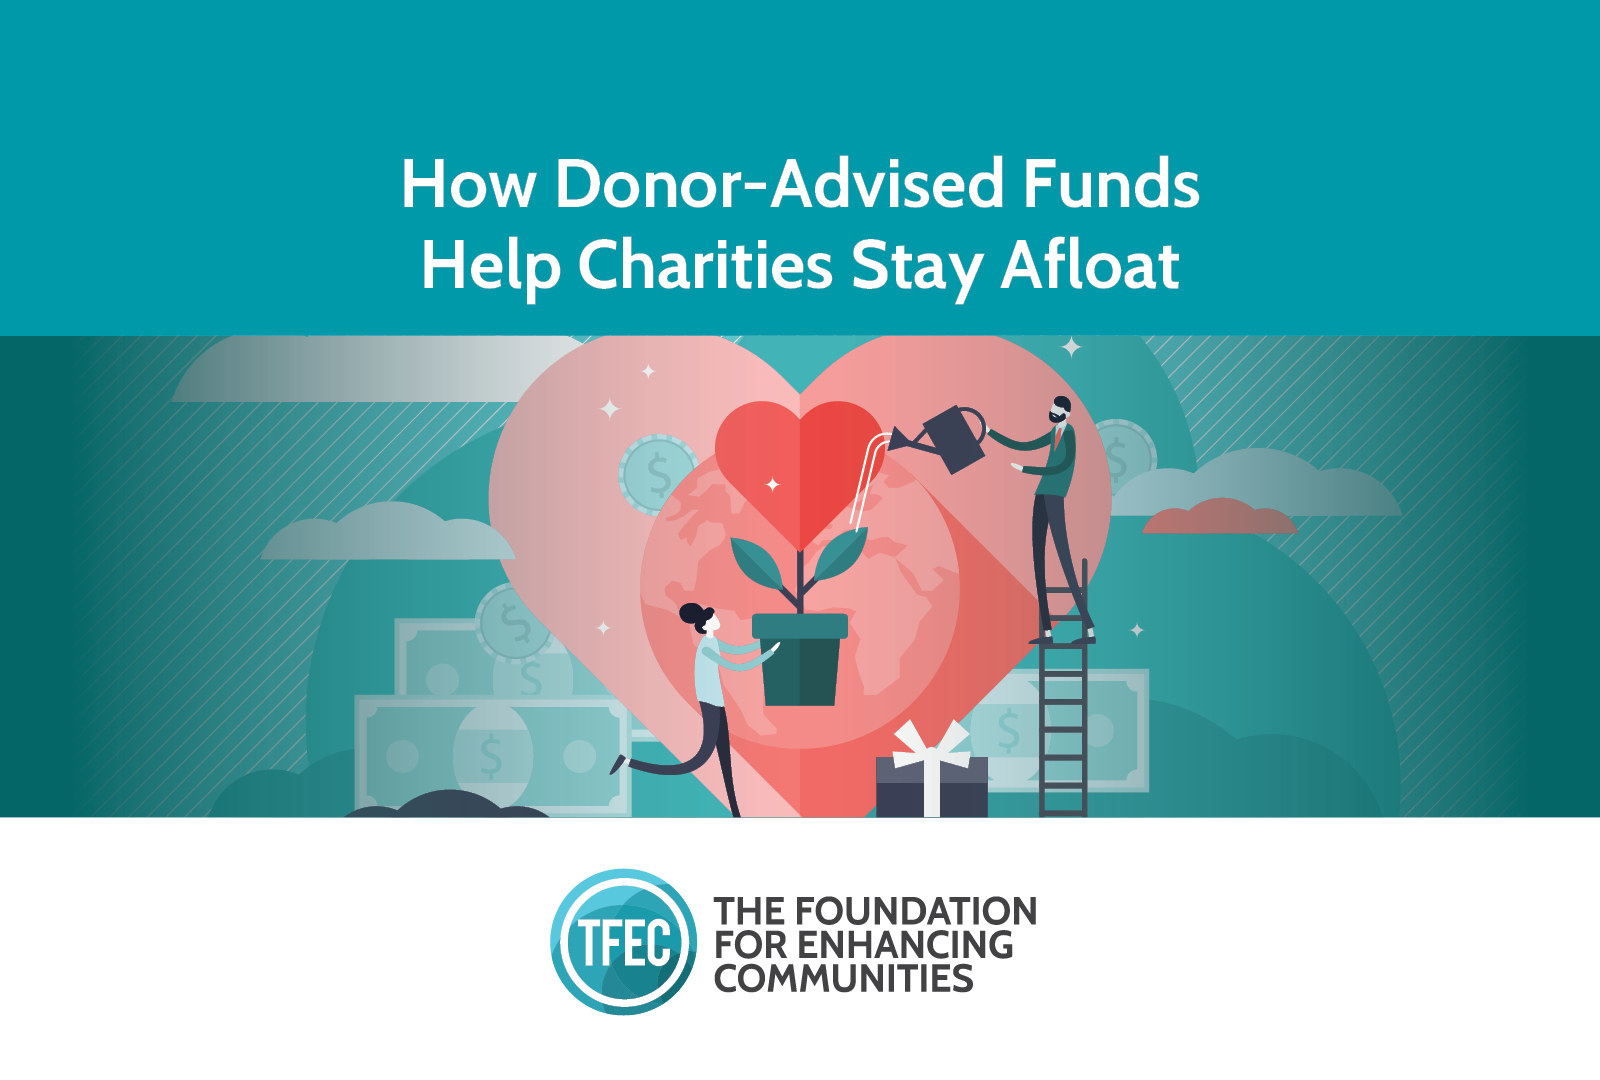 How Donor-Advised Funds Help Charities Stay Afloat